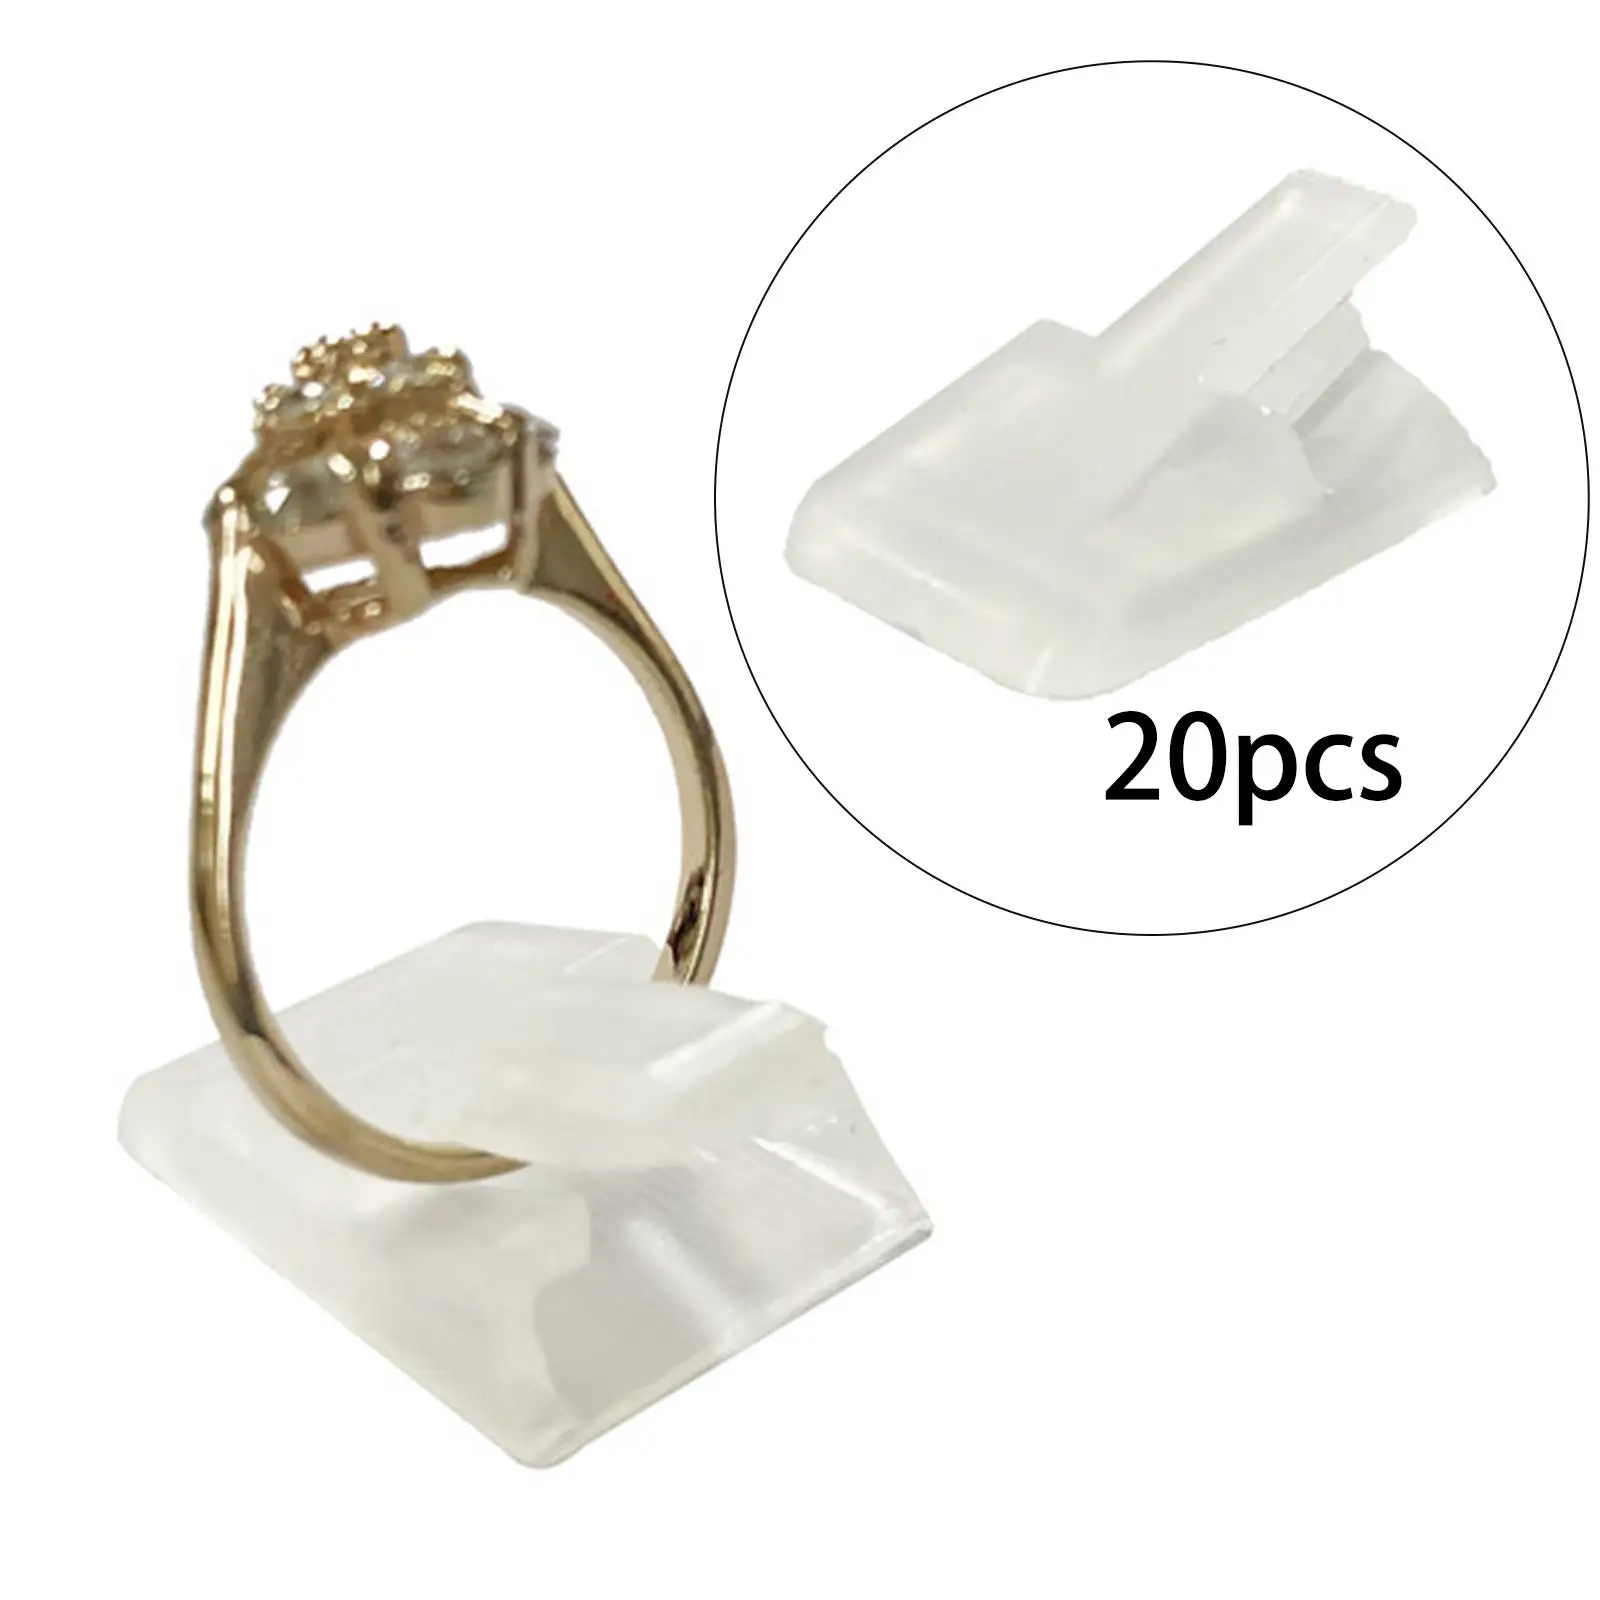 20 Pieces Ring Holder Jewelry Ring Decorative Organiser Ring Clip Stand Lightweight Jewellery Holder Rack Display Stand Showcase